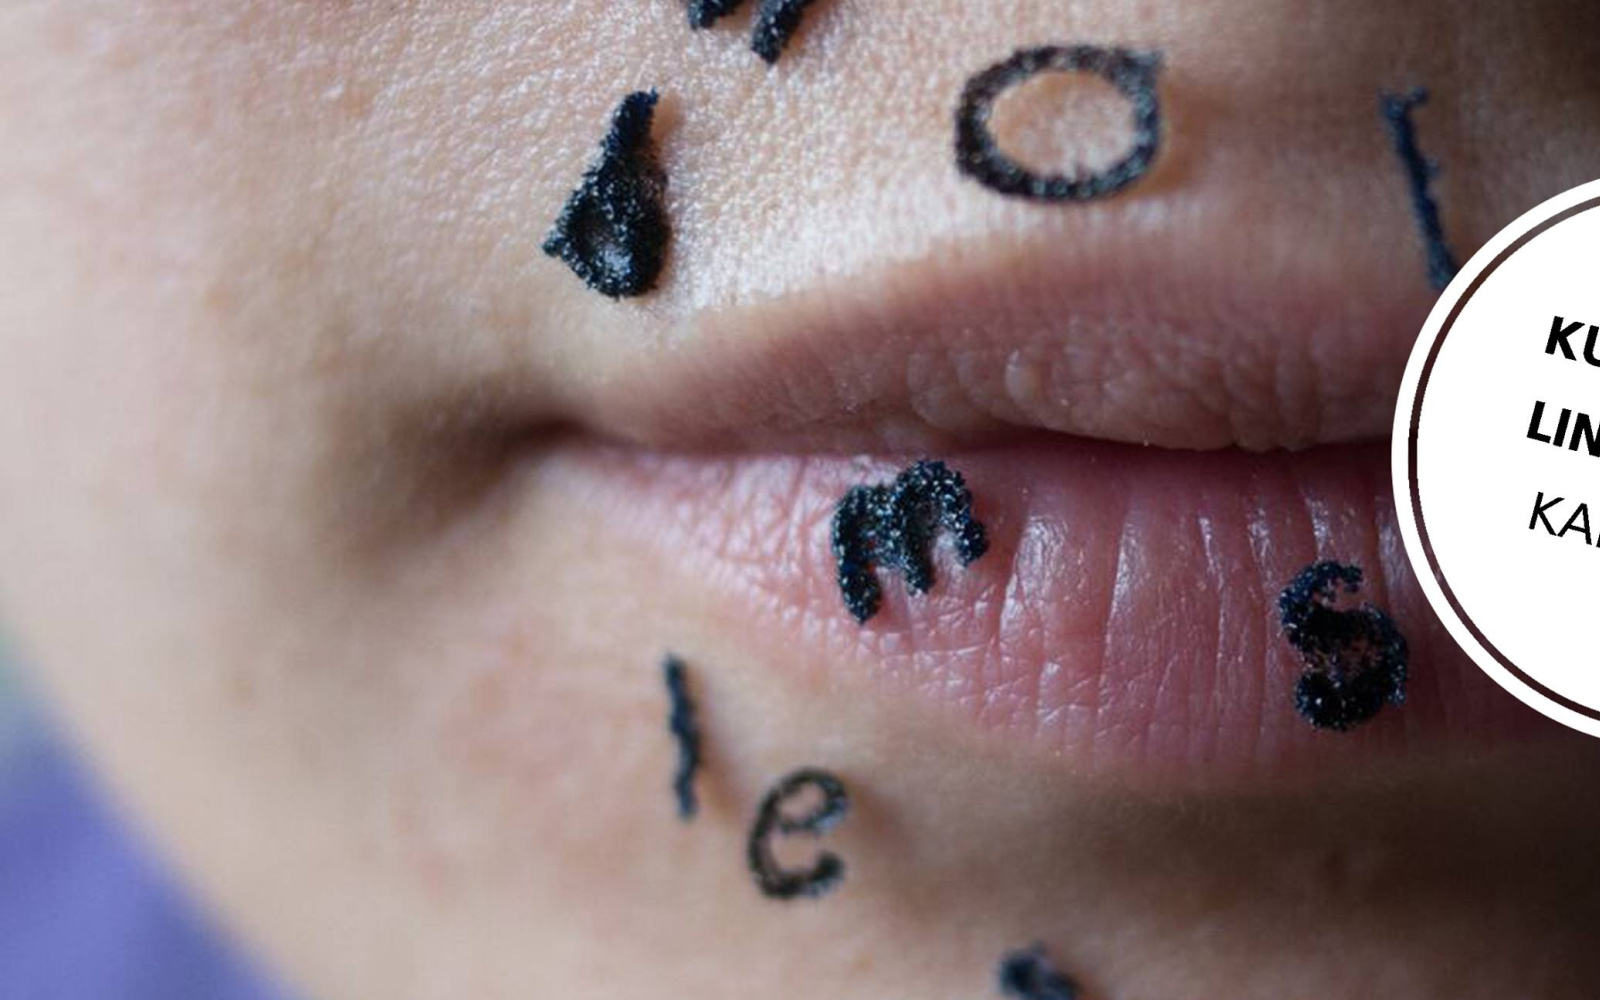 Close-up of a mouth with painted black letters on the skin.